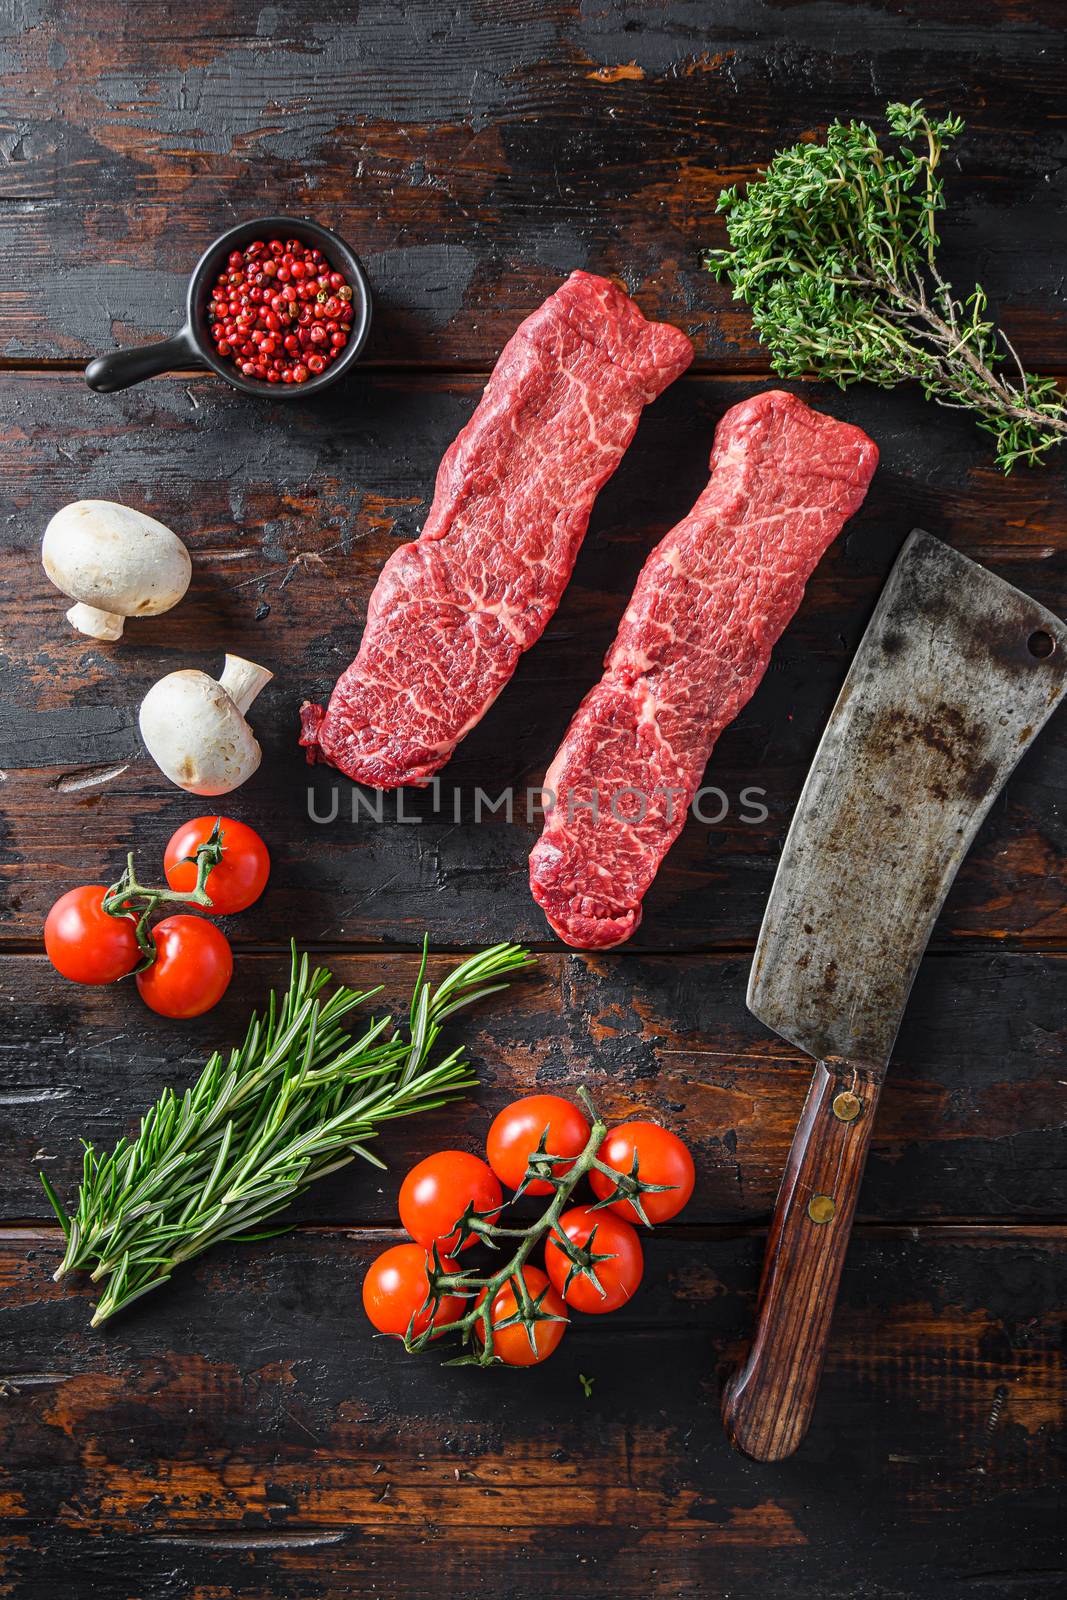 Organic denver steak, raw meat, marbled black angus beef cut on metal butcher cleaver knife with rosemary and farm herbs over old wood table background top view .